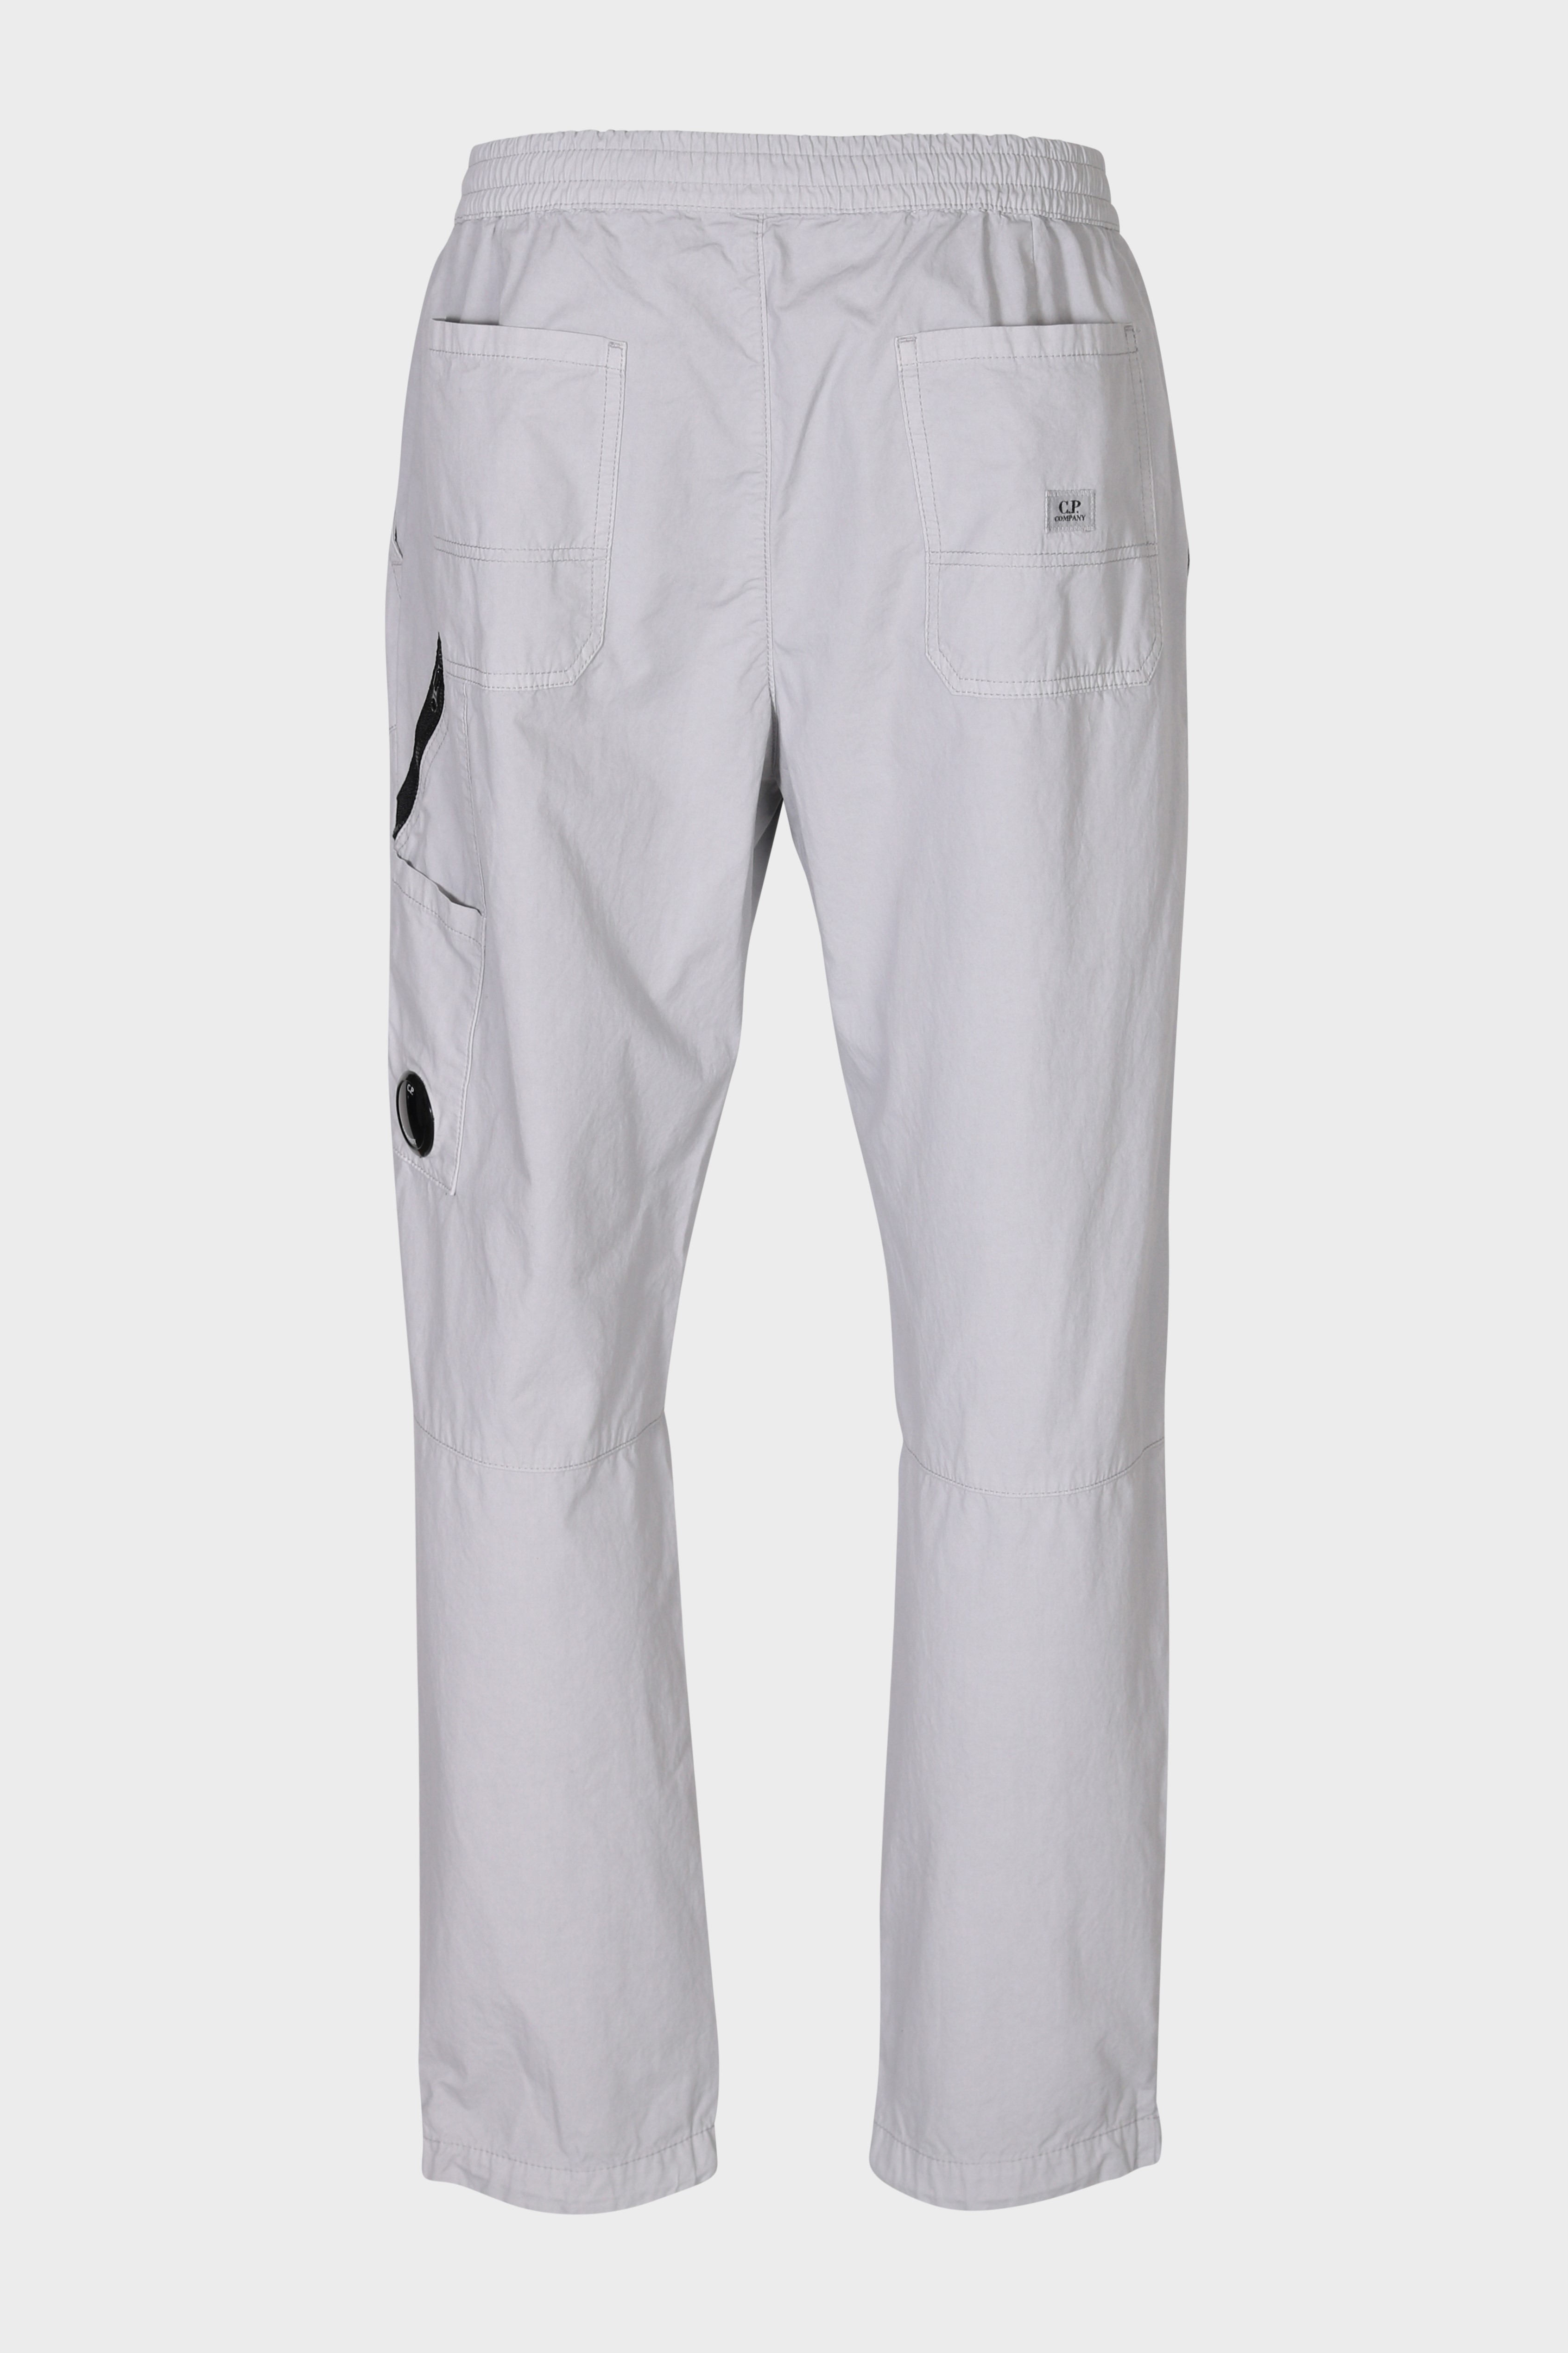 C.P. COMPANY Worker Pant in Drizzle Grey 46